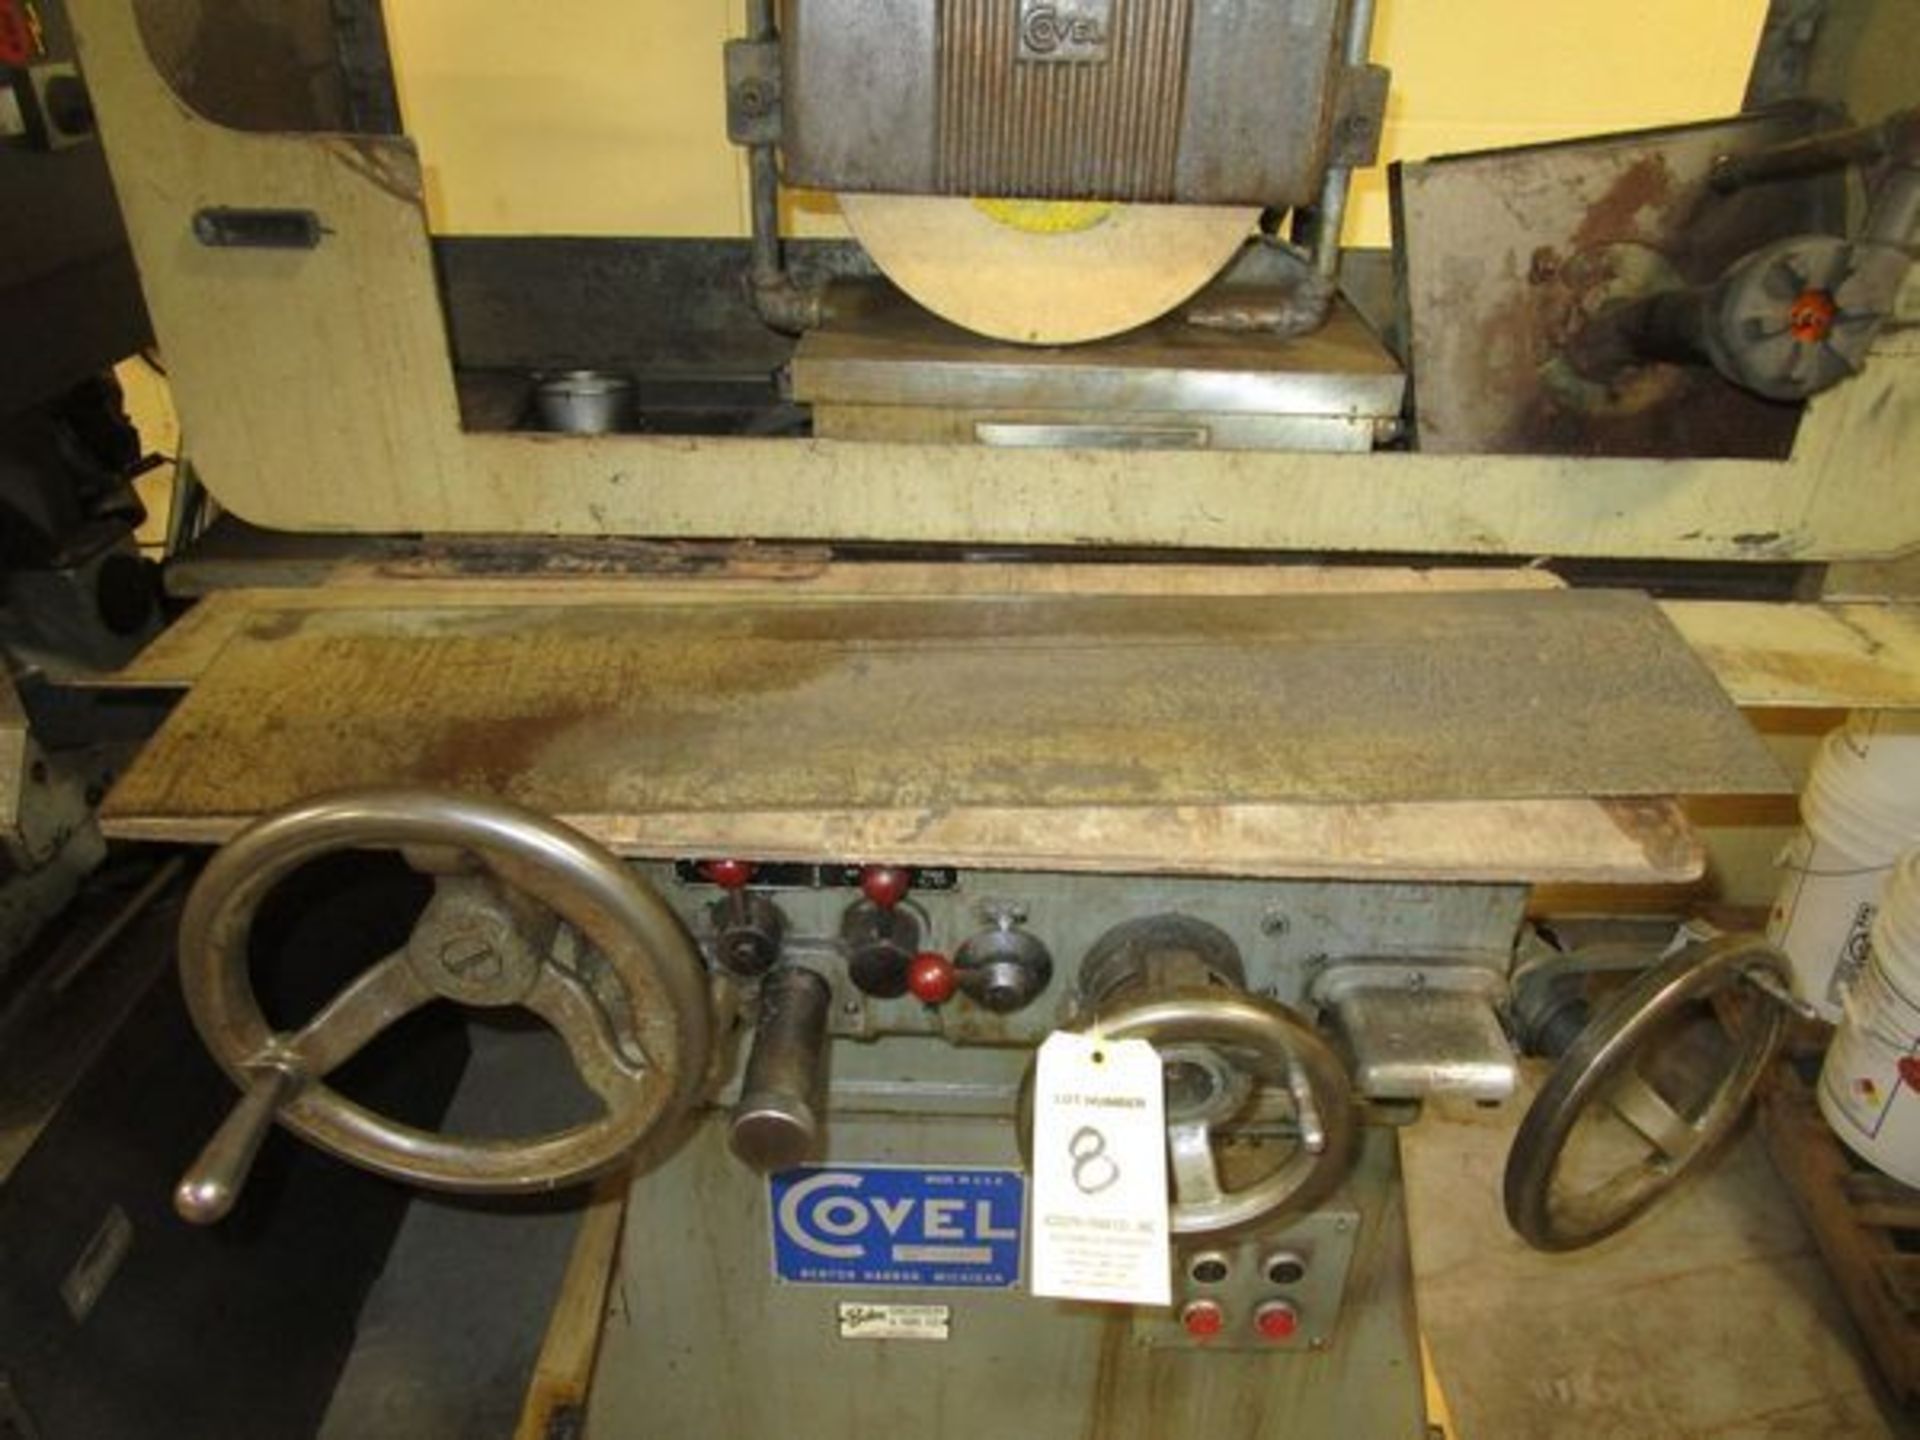 Covel Mod. 17H Surface Grinder, s/n 17H-5531, 10" x 17" Mag Chuck w/Electro-Matic Magnetic Chuck - Image 2 of 3